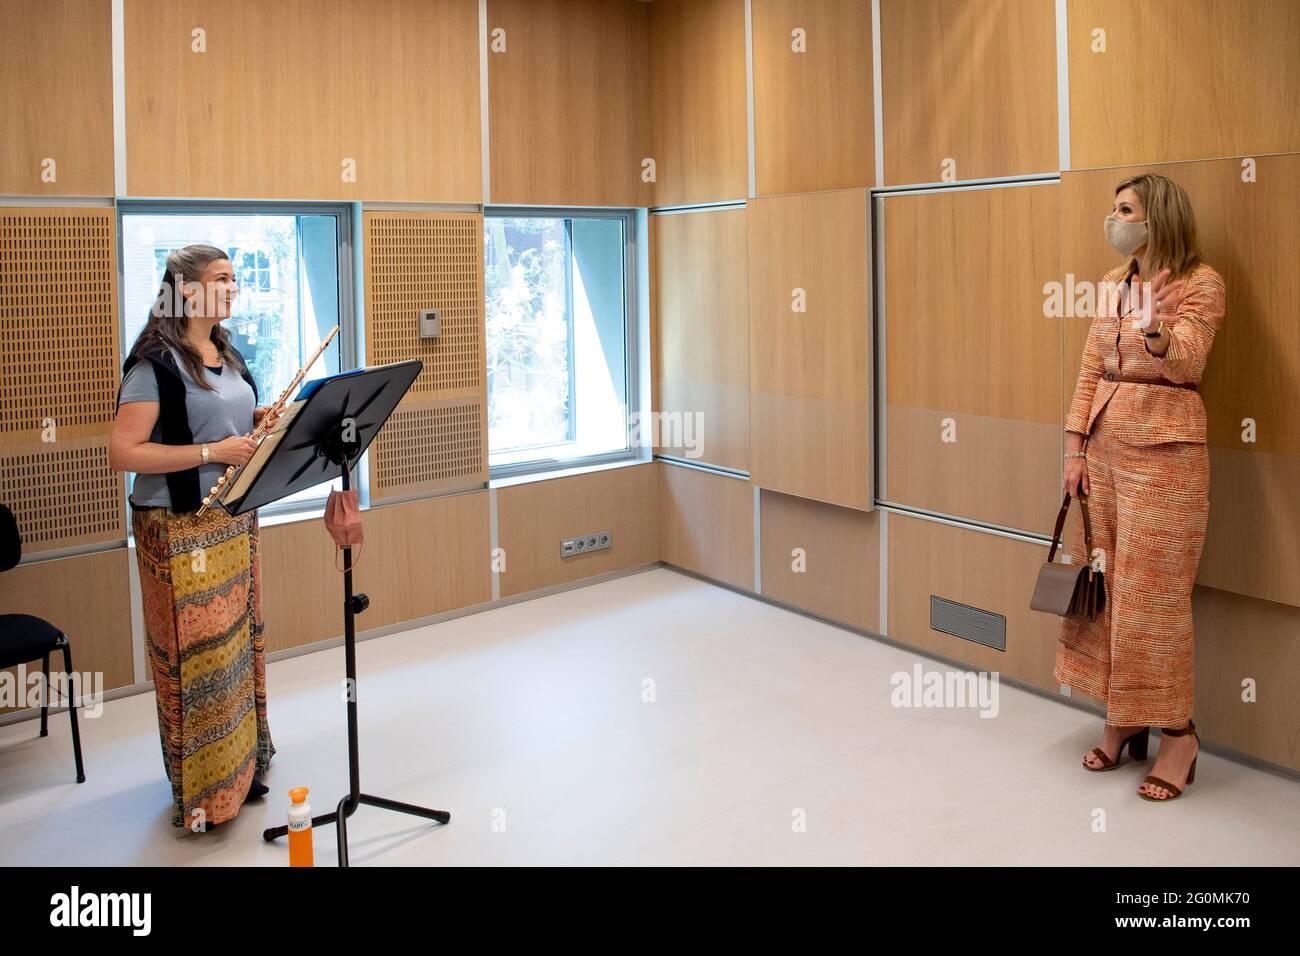 Amsterdam, Niederlande. 02nd June, 2021. Queen Maxima of The Netherlands at the Academie of the Koninklijk Concertgebouworkest in Amsterdam, on June 02, 2021, for a workvisit, talked about the activities during the corona pandemic, the orchestras plans for the future and the various education programs Credit: Albert Nieboer/Netherlands OUT/Point de Vue OUT/dpa/Alamy Live News Stock Photo